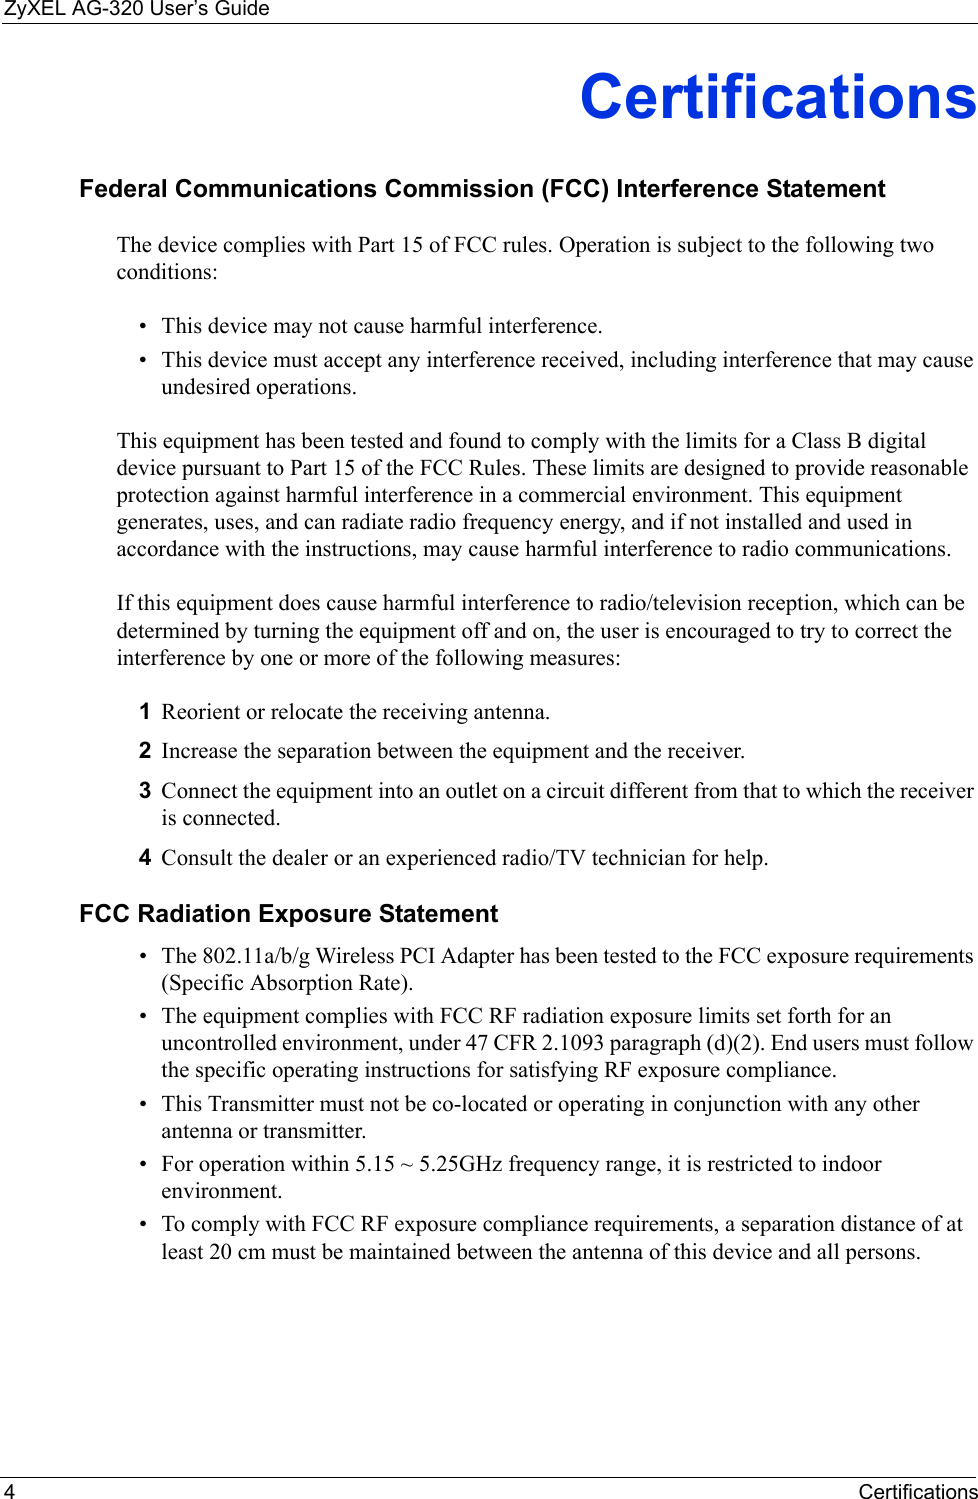 ZyXEL AG-320 User’s Guide4CertificationsCertificationsFederal Communications Commission (FCC) Interference StatementThe device complies with Part 15 of FCC rules. Operation is subject to the following two conditions:• This device may not cause harmful interference.• This device must accept any interference received, including interference that may cause undesired operations.This equipment has been tested and found to comply with the limits for a Class B digital device pursuant to Part 15 of the FCC Rules. These limits are designed to provide reasonable protection against harmful interference in a commercial environment. This equipment generates, uses, and can radiate radio frequency energy, and if not installed and used in accordance with the instructions, may cause harmful interference to radio communications.If this equipment does cause harmful interference to radio/television reception, which can be determined by turning the equipment off and on, the user is encouraged to try to correct the interference by one or more of the following measures:1Reorient or relocate the receiving antenna.2Increase the separation between the equipment and the receiver.3Connect the equipment into an outlet on a circuit different from that to which the receiver is connected.4Consult the dealer or an experienced radio/TV technician for help.FCC Radiation Exposure Statement• The 802.11a/b/g Wireless PCI Adapter has been tested to the FCC exposure requirements (Specific Absorption Rate). • The equipment complies with FCC RF radiation exposure limits set forth for an uncontrolled environment, under 47 CFR 2.1093 paragraph (d)(2). End users must follow the specific operating instructions for satisfying RF exposure compliance. • This Transmitter must not be co-located or operating in conjunction with any other antenna or transmitter. • For operation within 5.15 ~ 5.25GHz frequency range, it is restricted to indoor environment. • To comply with FCC RF exposure compliance requirements, a separation distance of at least 20 cm must be maintained between the antenna of this device and all persons. 